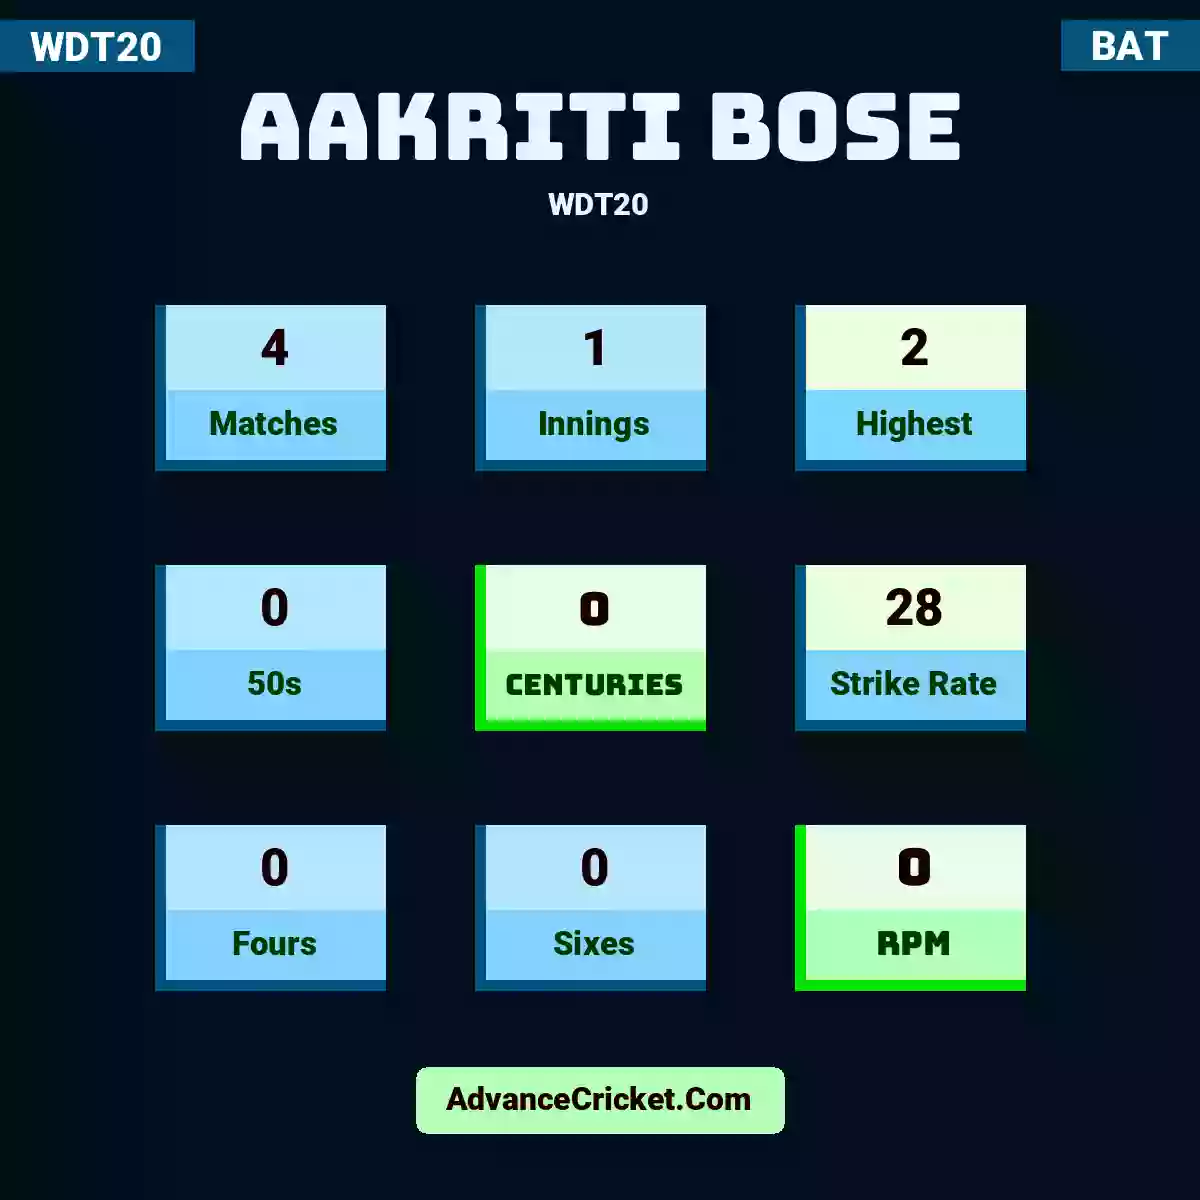 Aakriti Bose WDT20 , Aakriti Bose played 4 matches, scored 2 runs as highest, 0 half-centuries, and 0 centuries, with a strike rate of 28. A.Bose hit 0 fours and 0 sixes, with an RPM of 0.